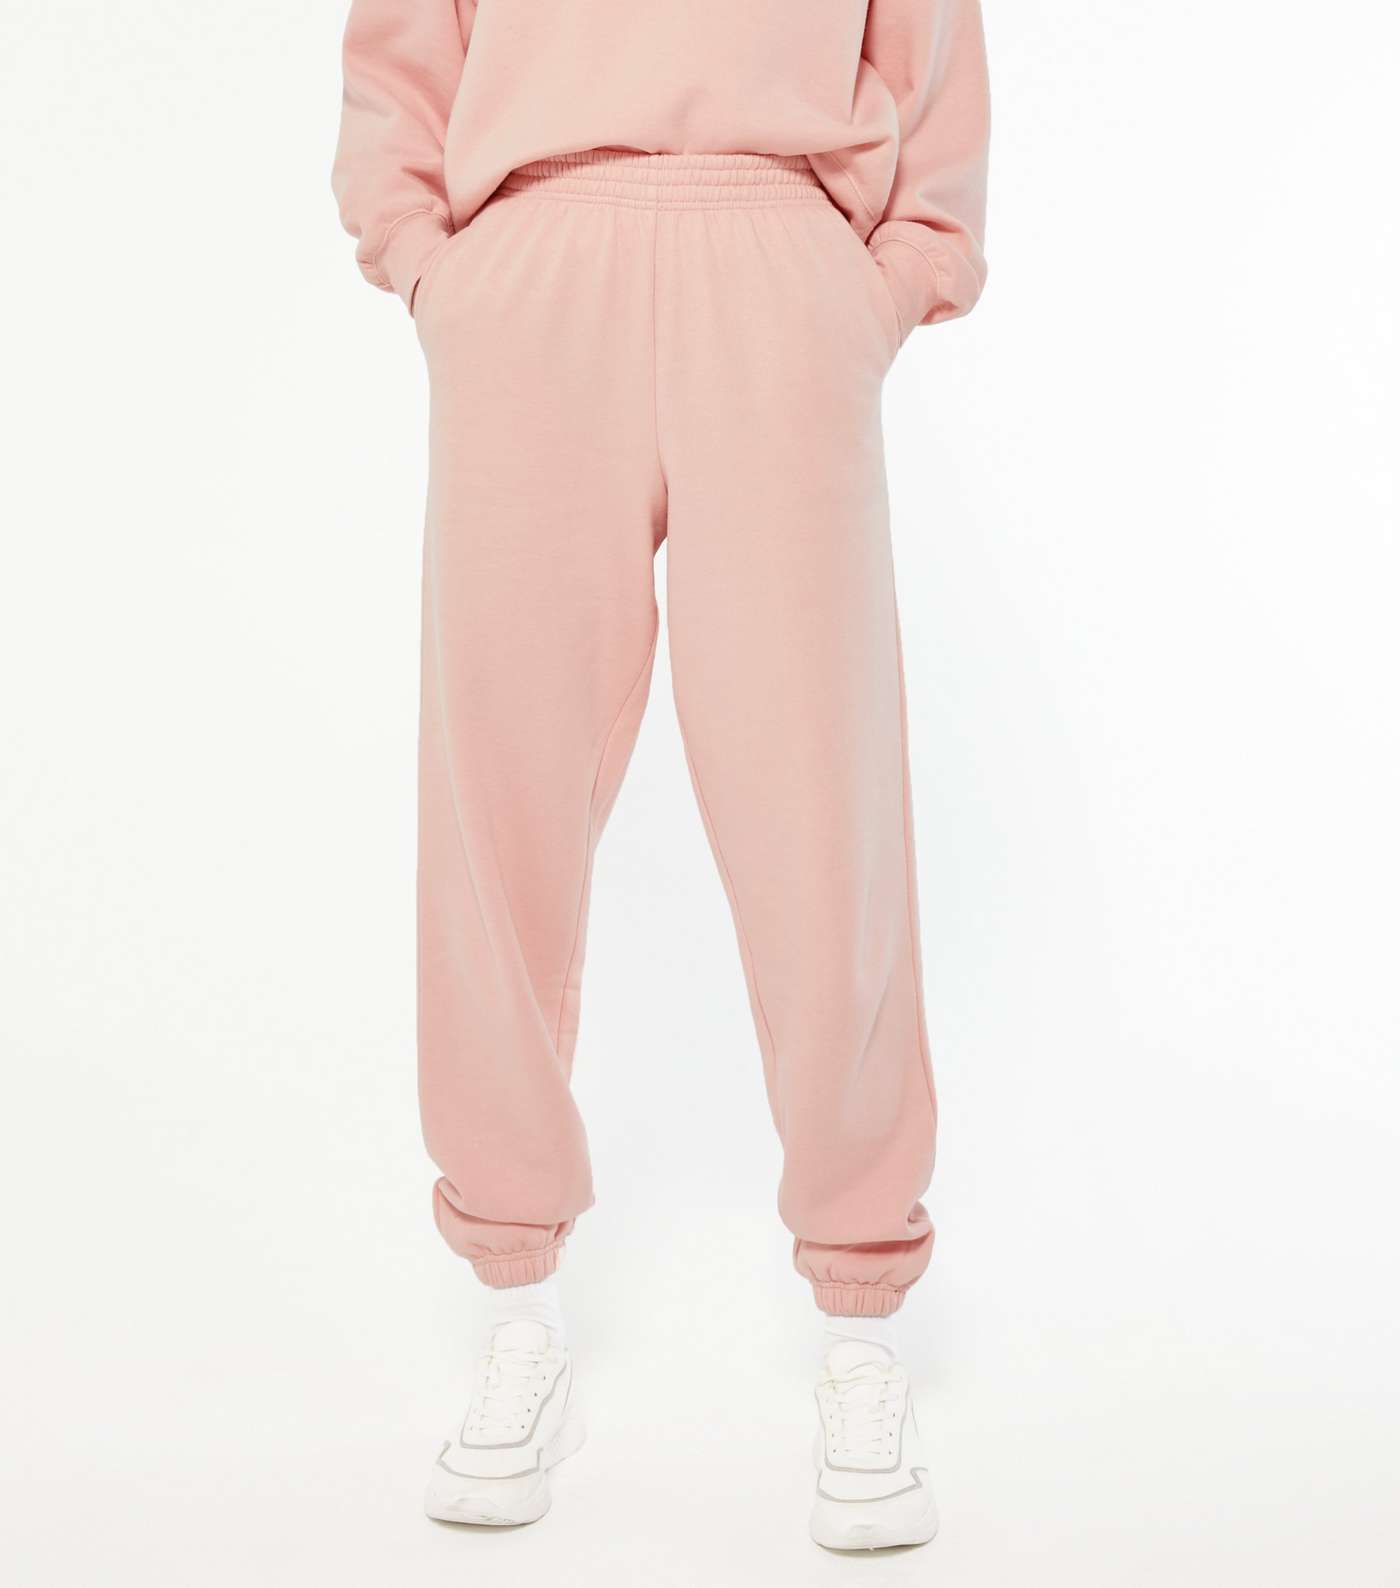 Tall Pale Pink Cuffed Joggers Image 2